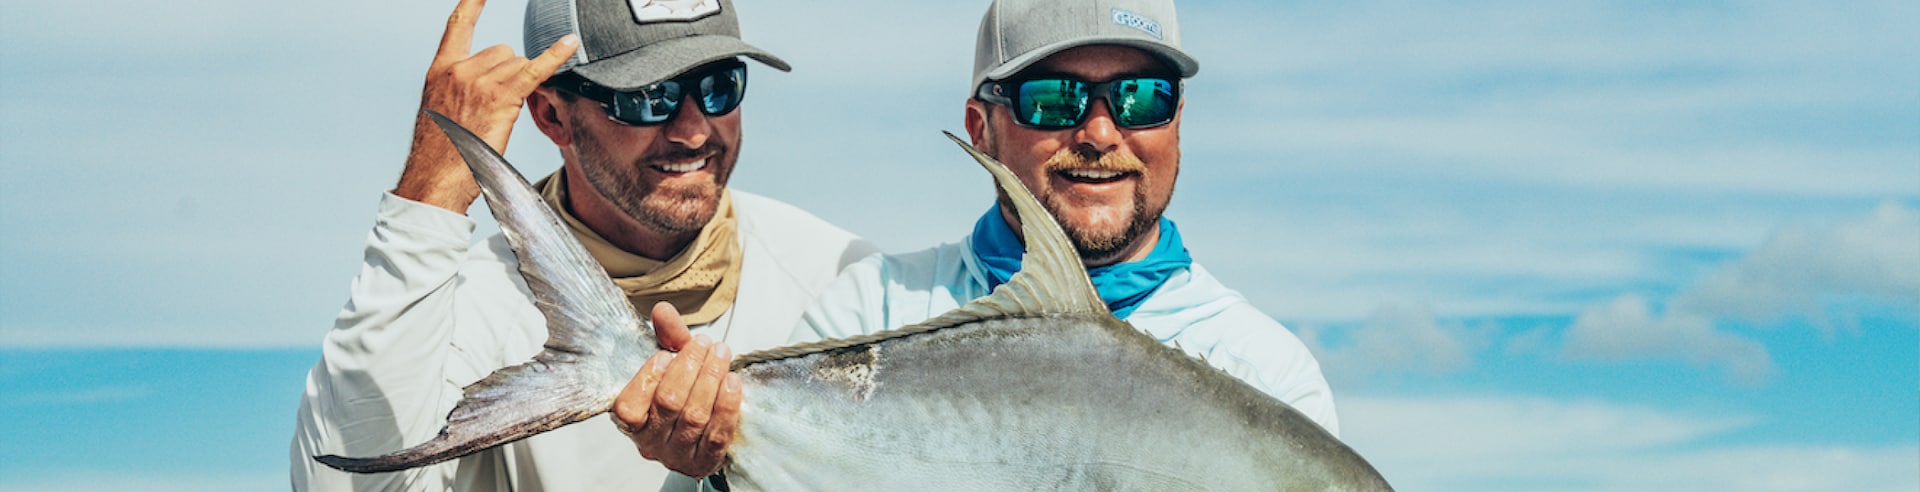 Best Men's FISHING Sunglasses from COSTA for 2021!